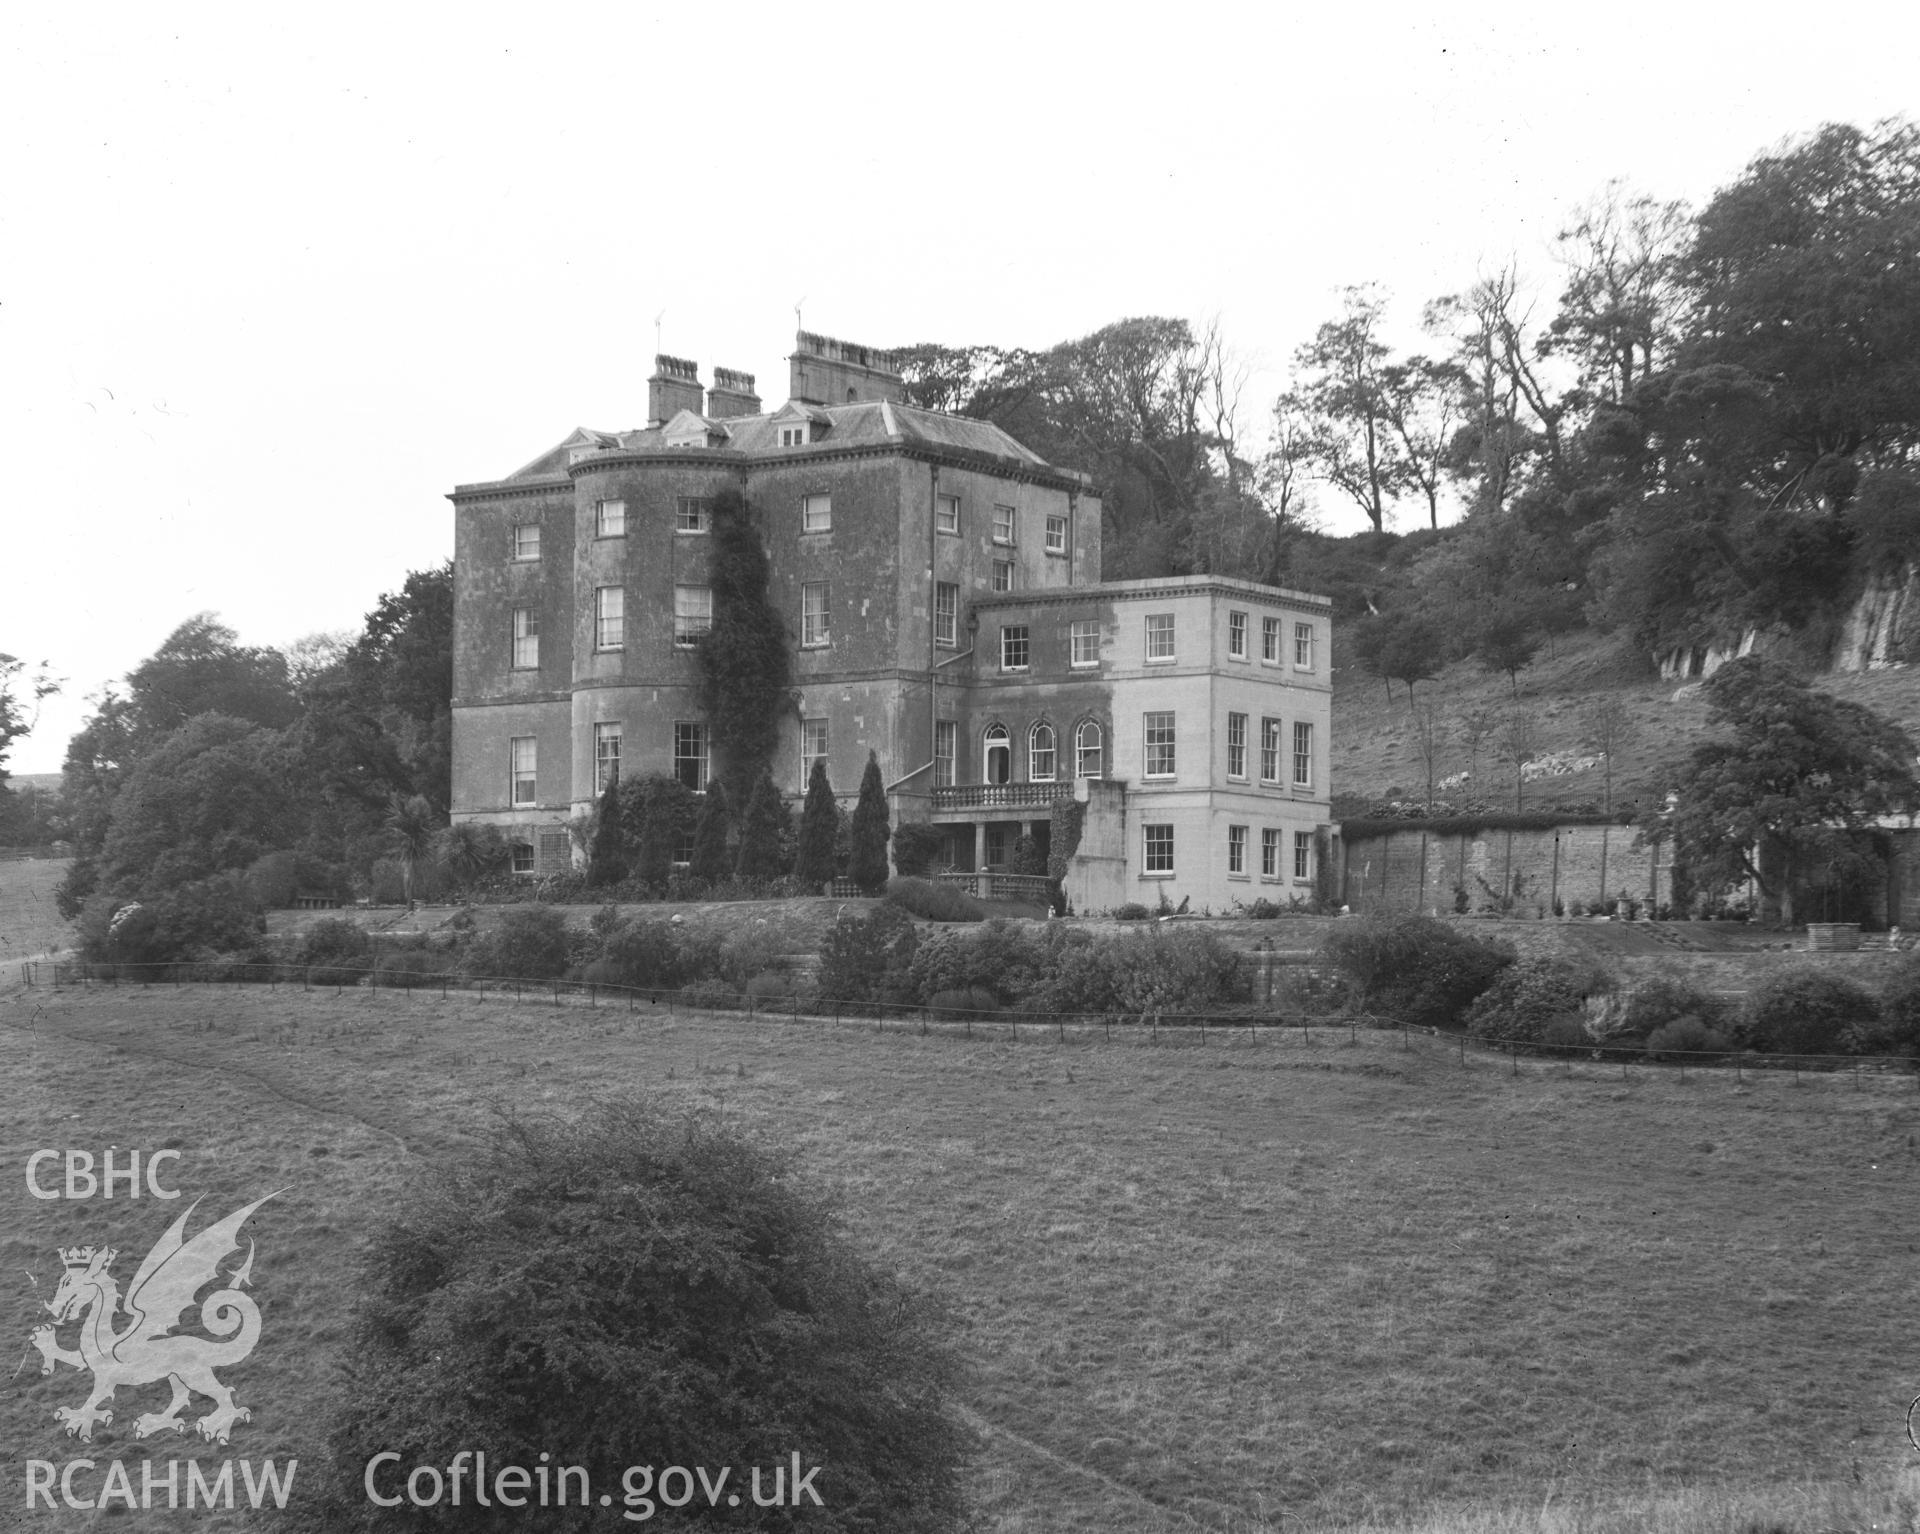 Black and white acetate negative showing an exterior view of Penrice Castle.